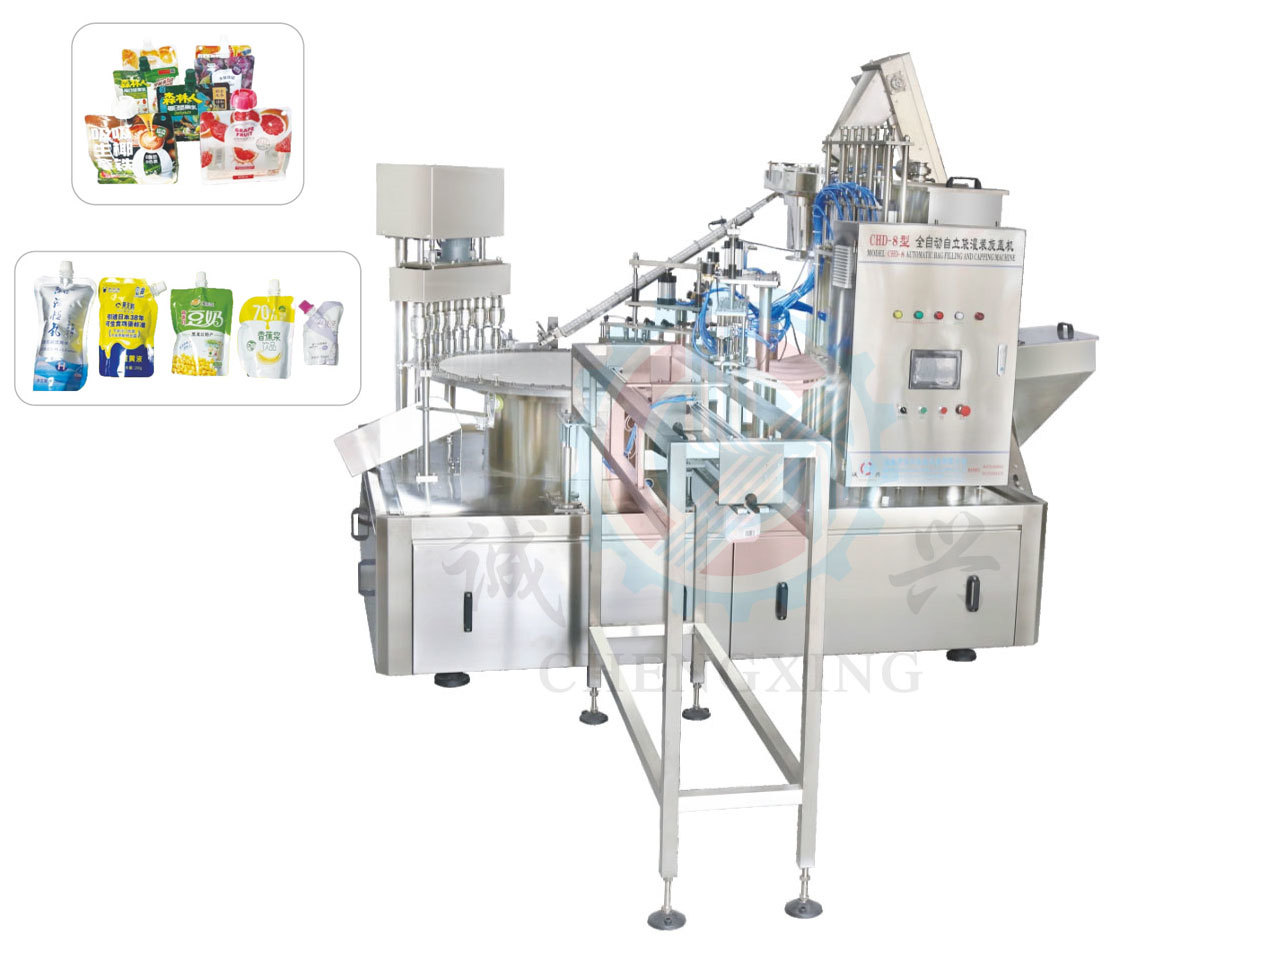 CHD-6 Type Automatic Self-standing bag filling and Capping machine(economical)